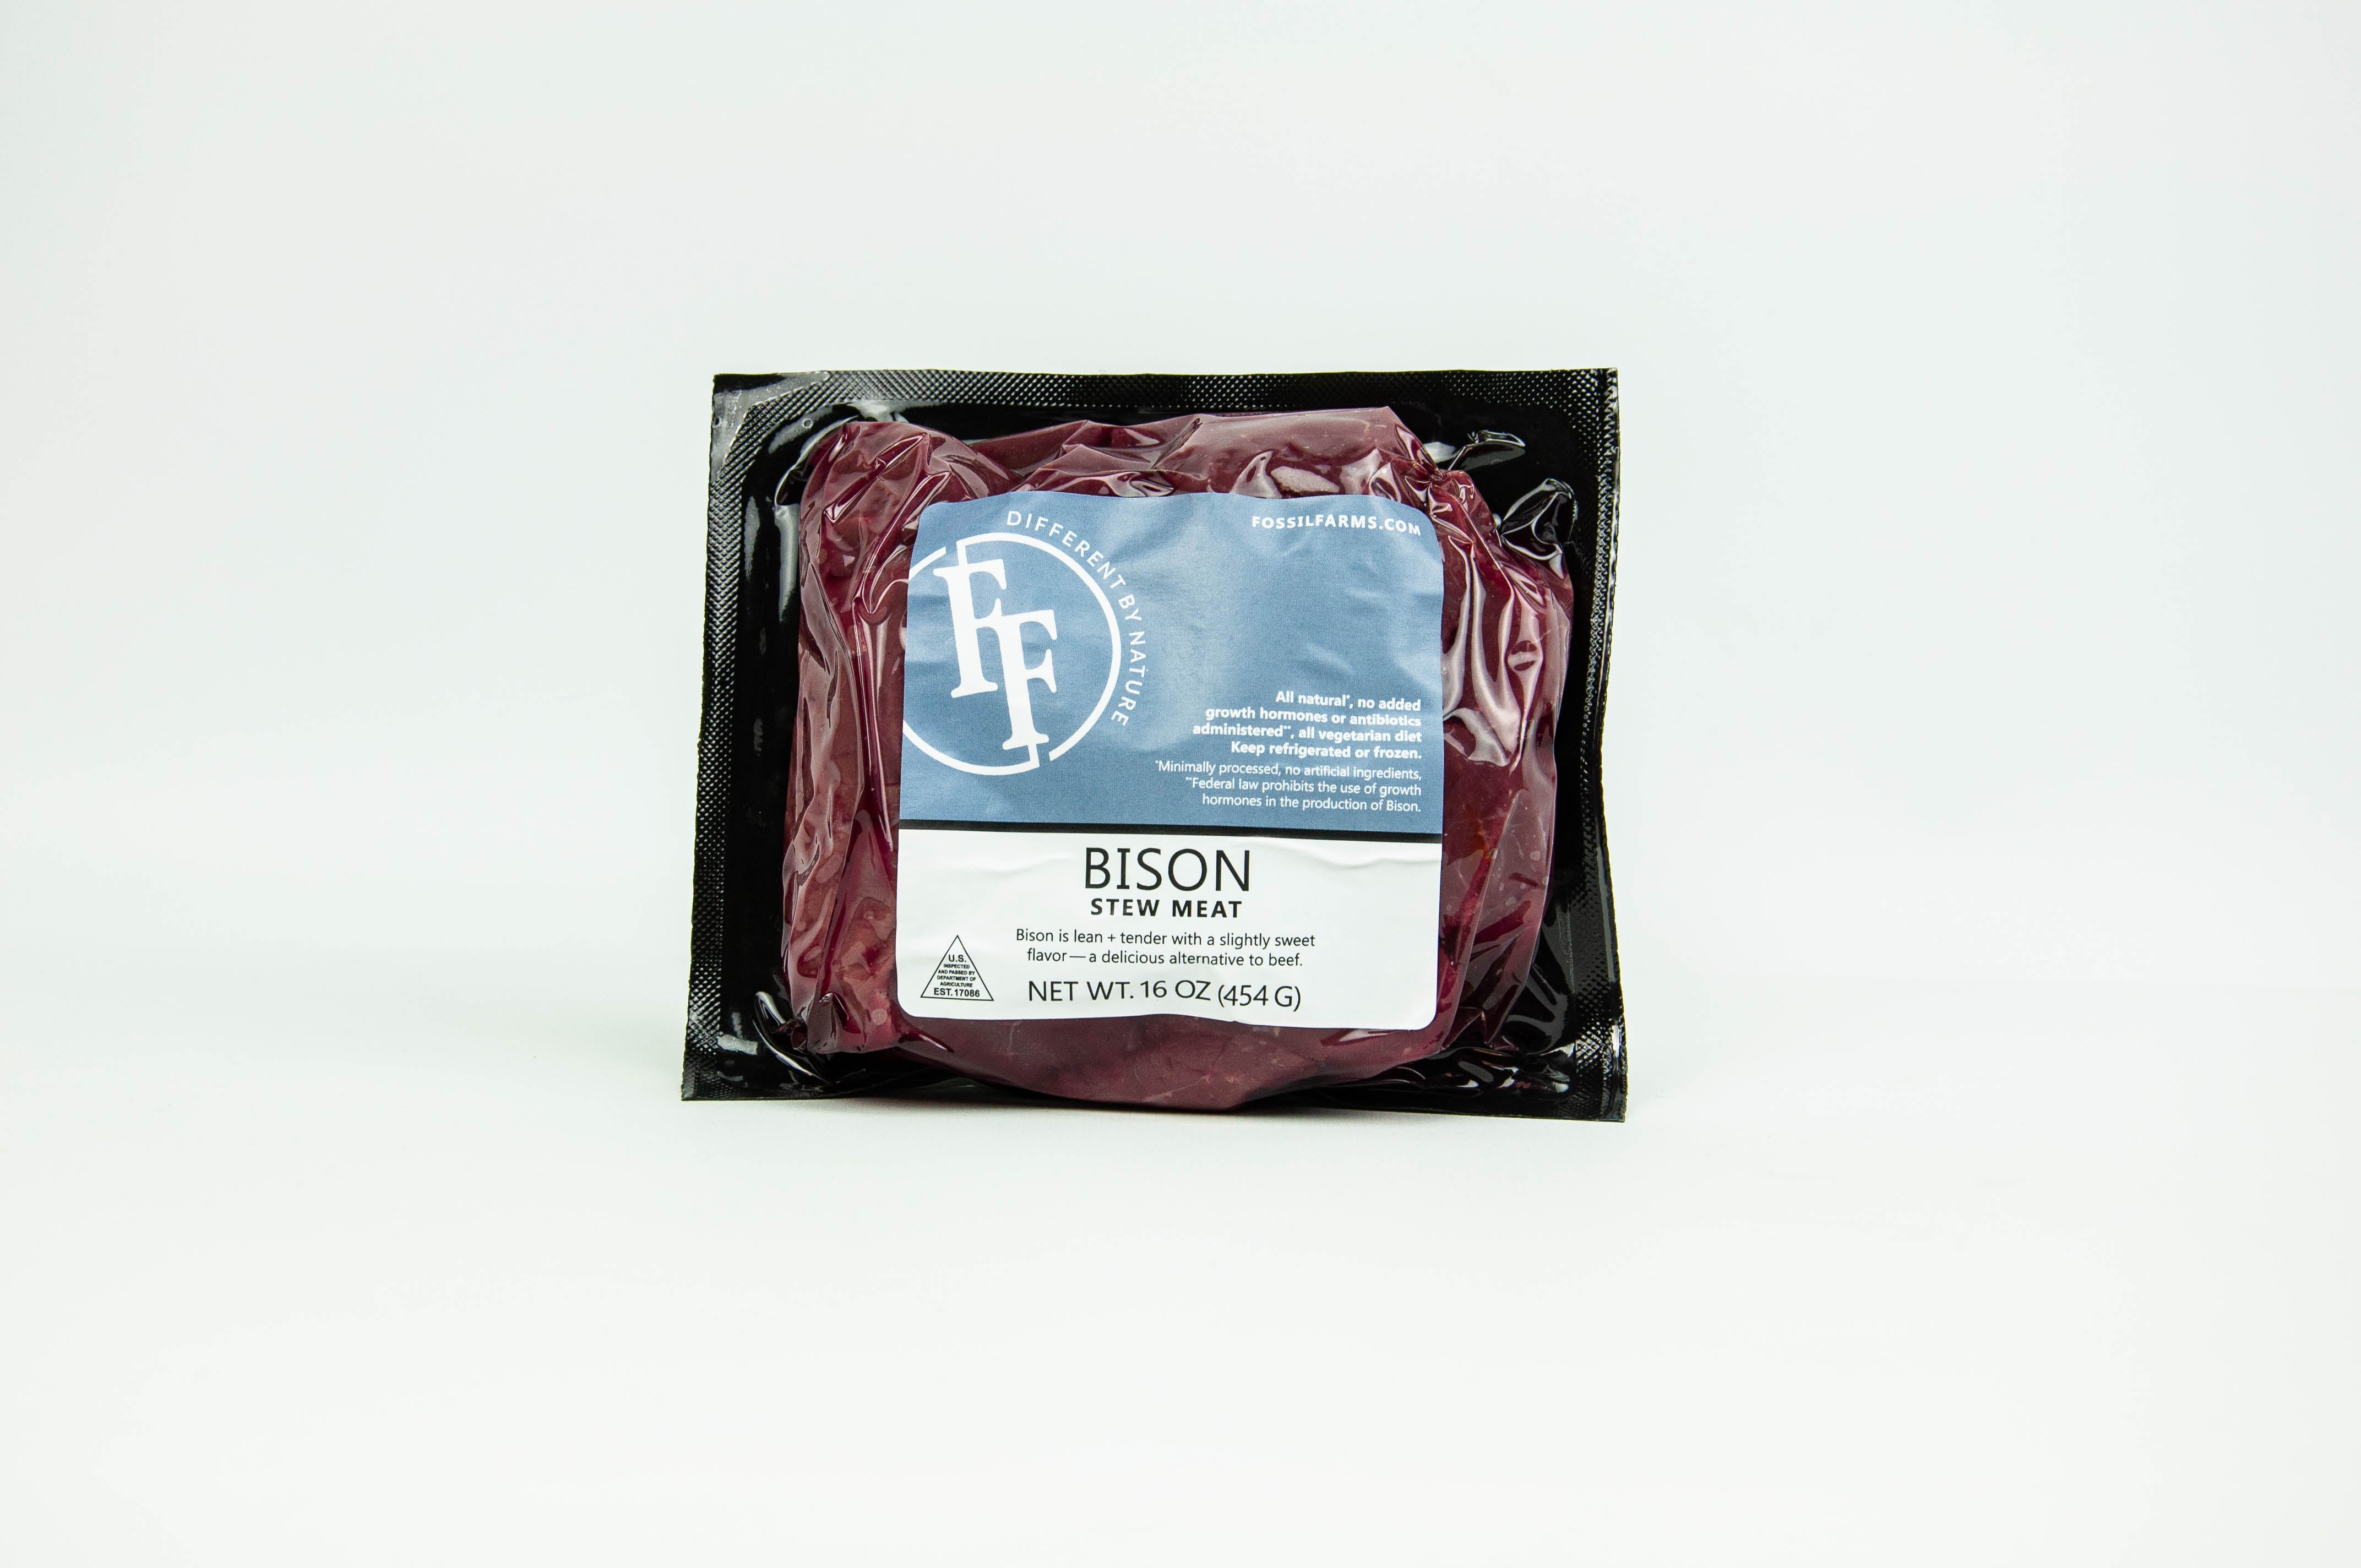 Bison Stew Meat Packaged